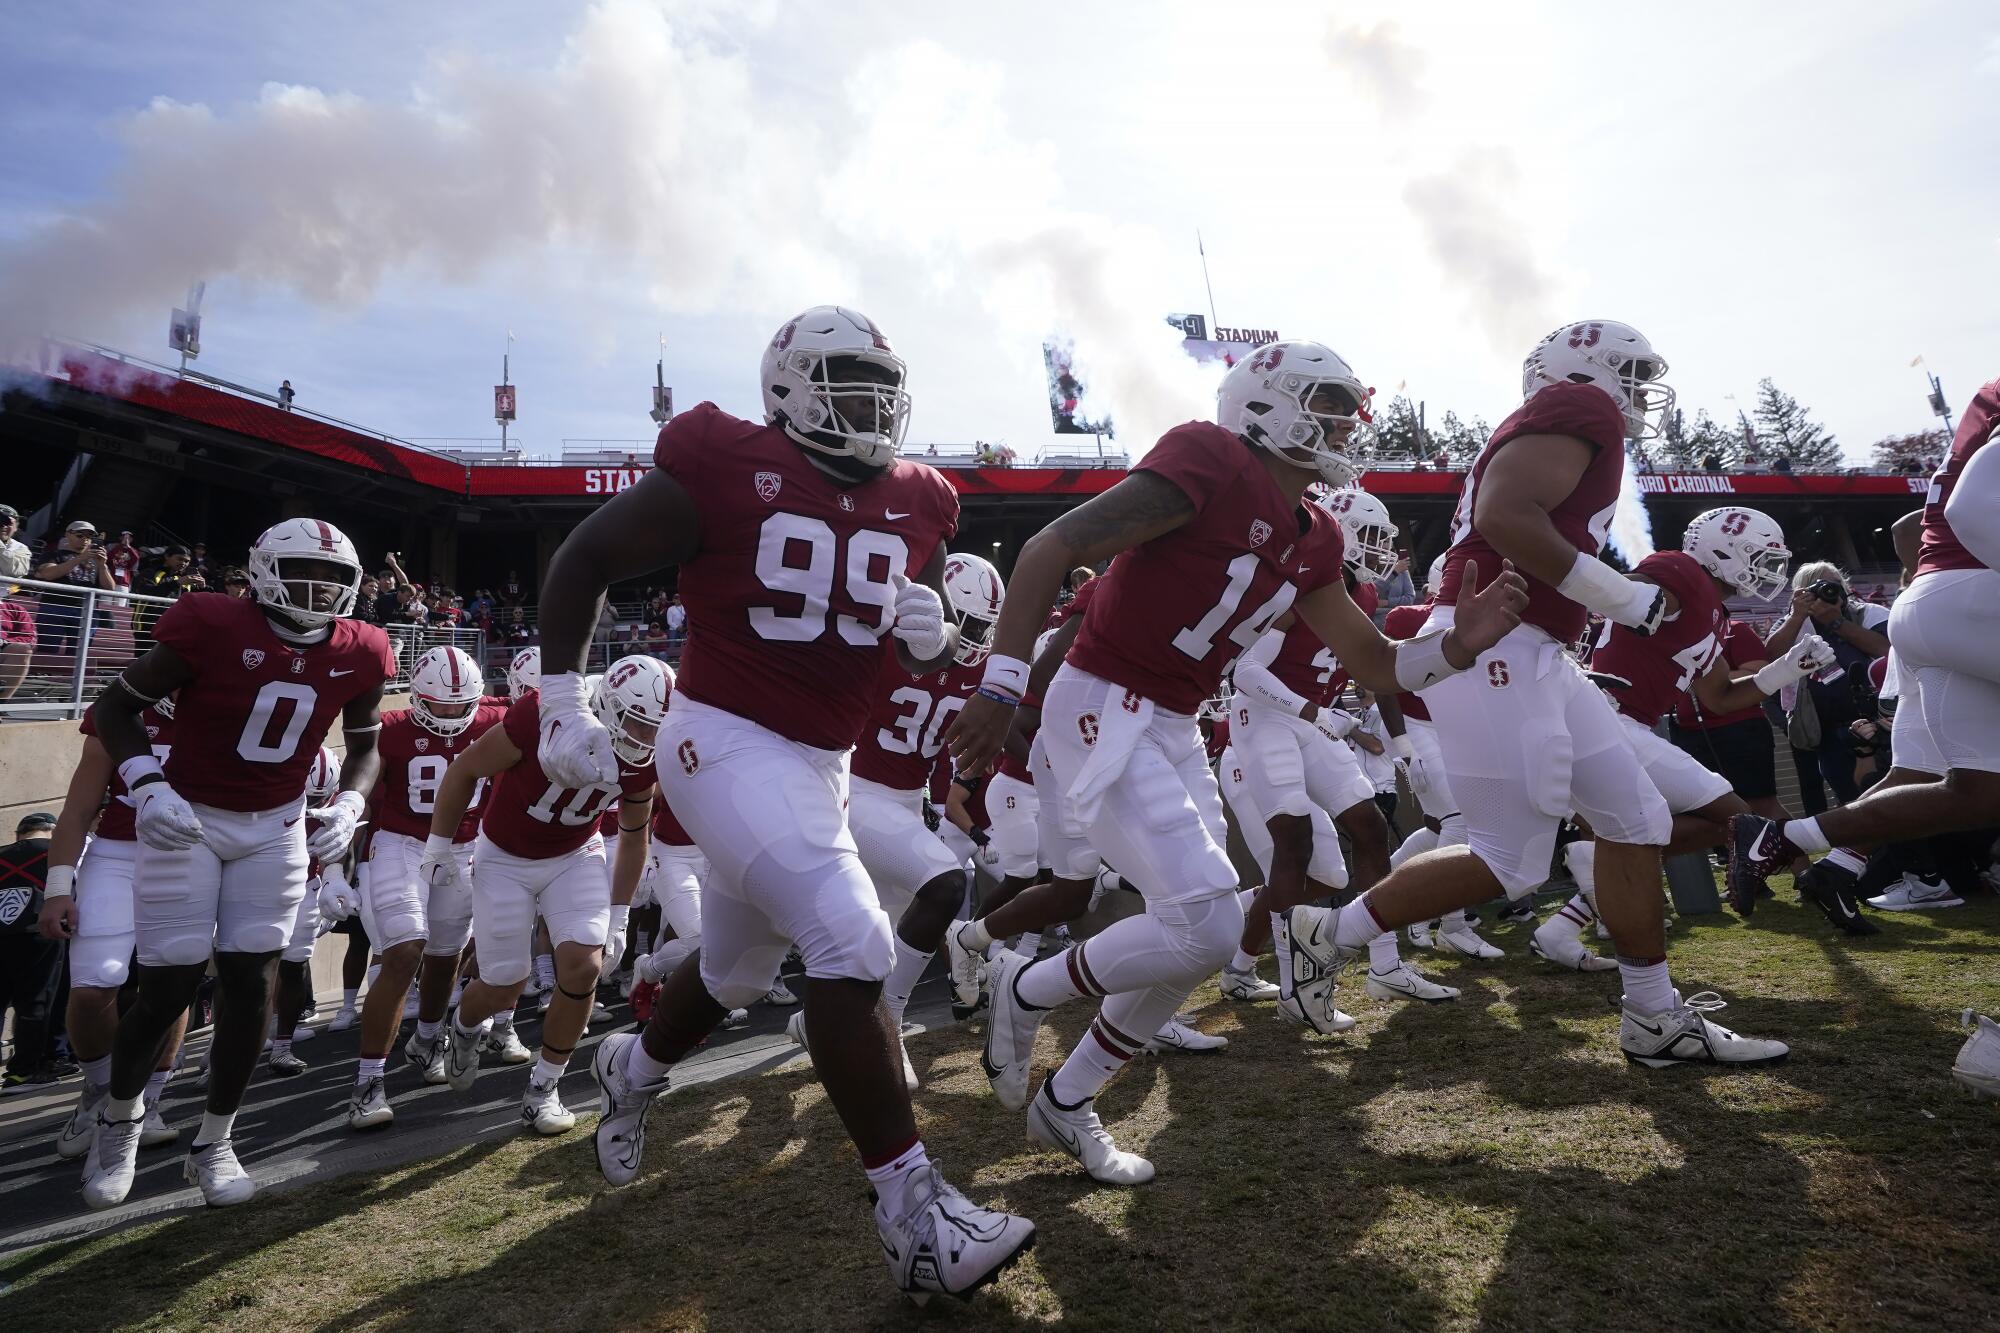 Stanford players run onto the field before an NCAA college football game against Arizona State.